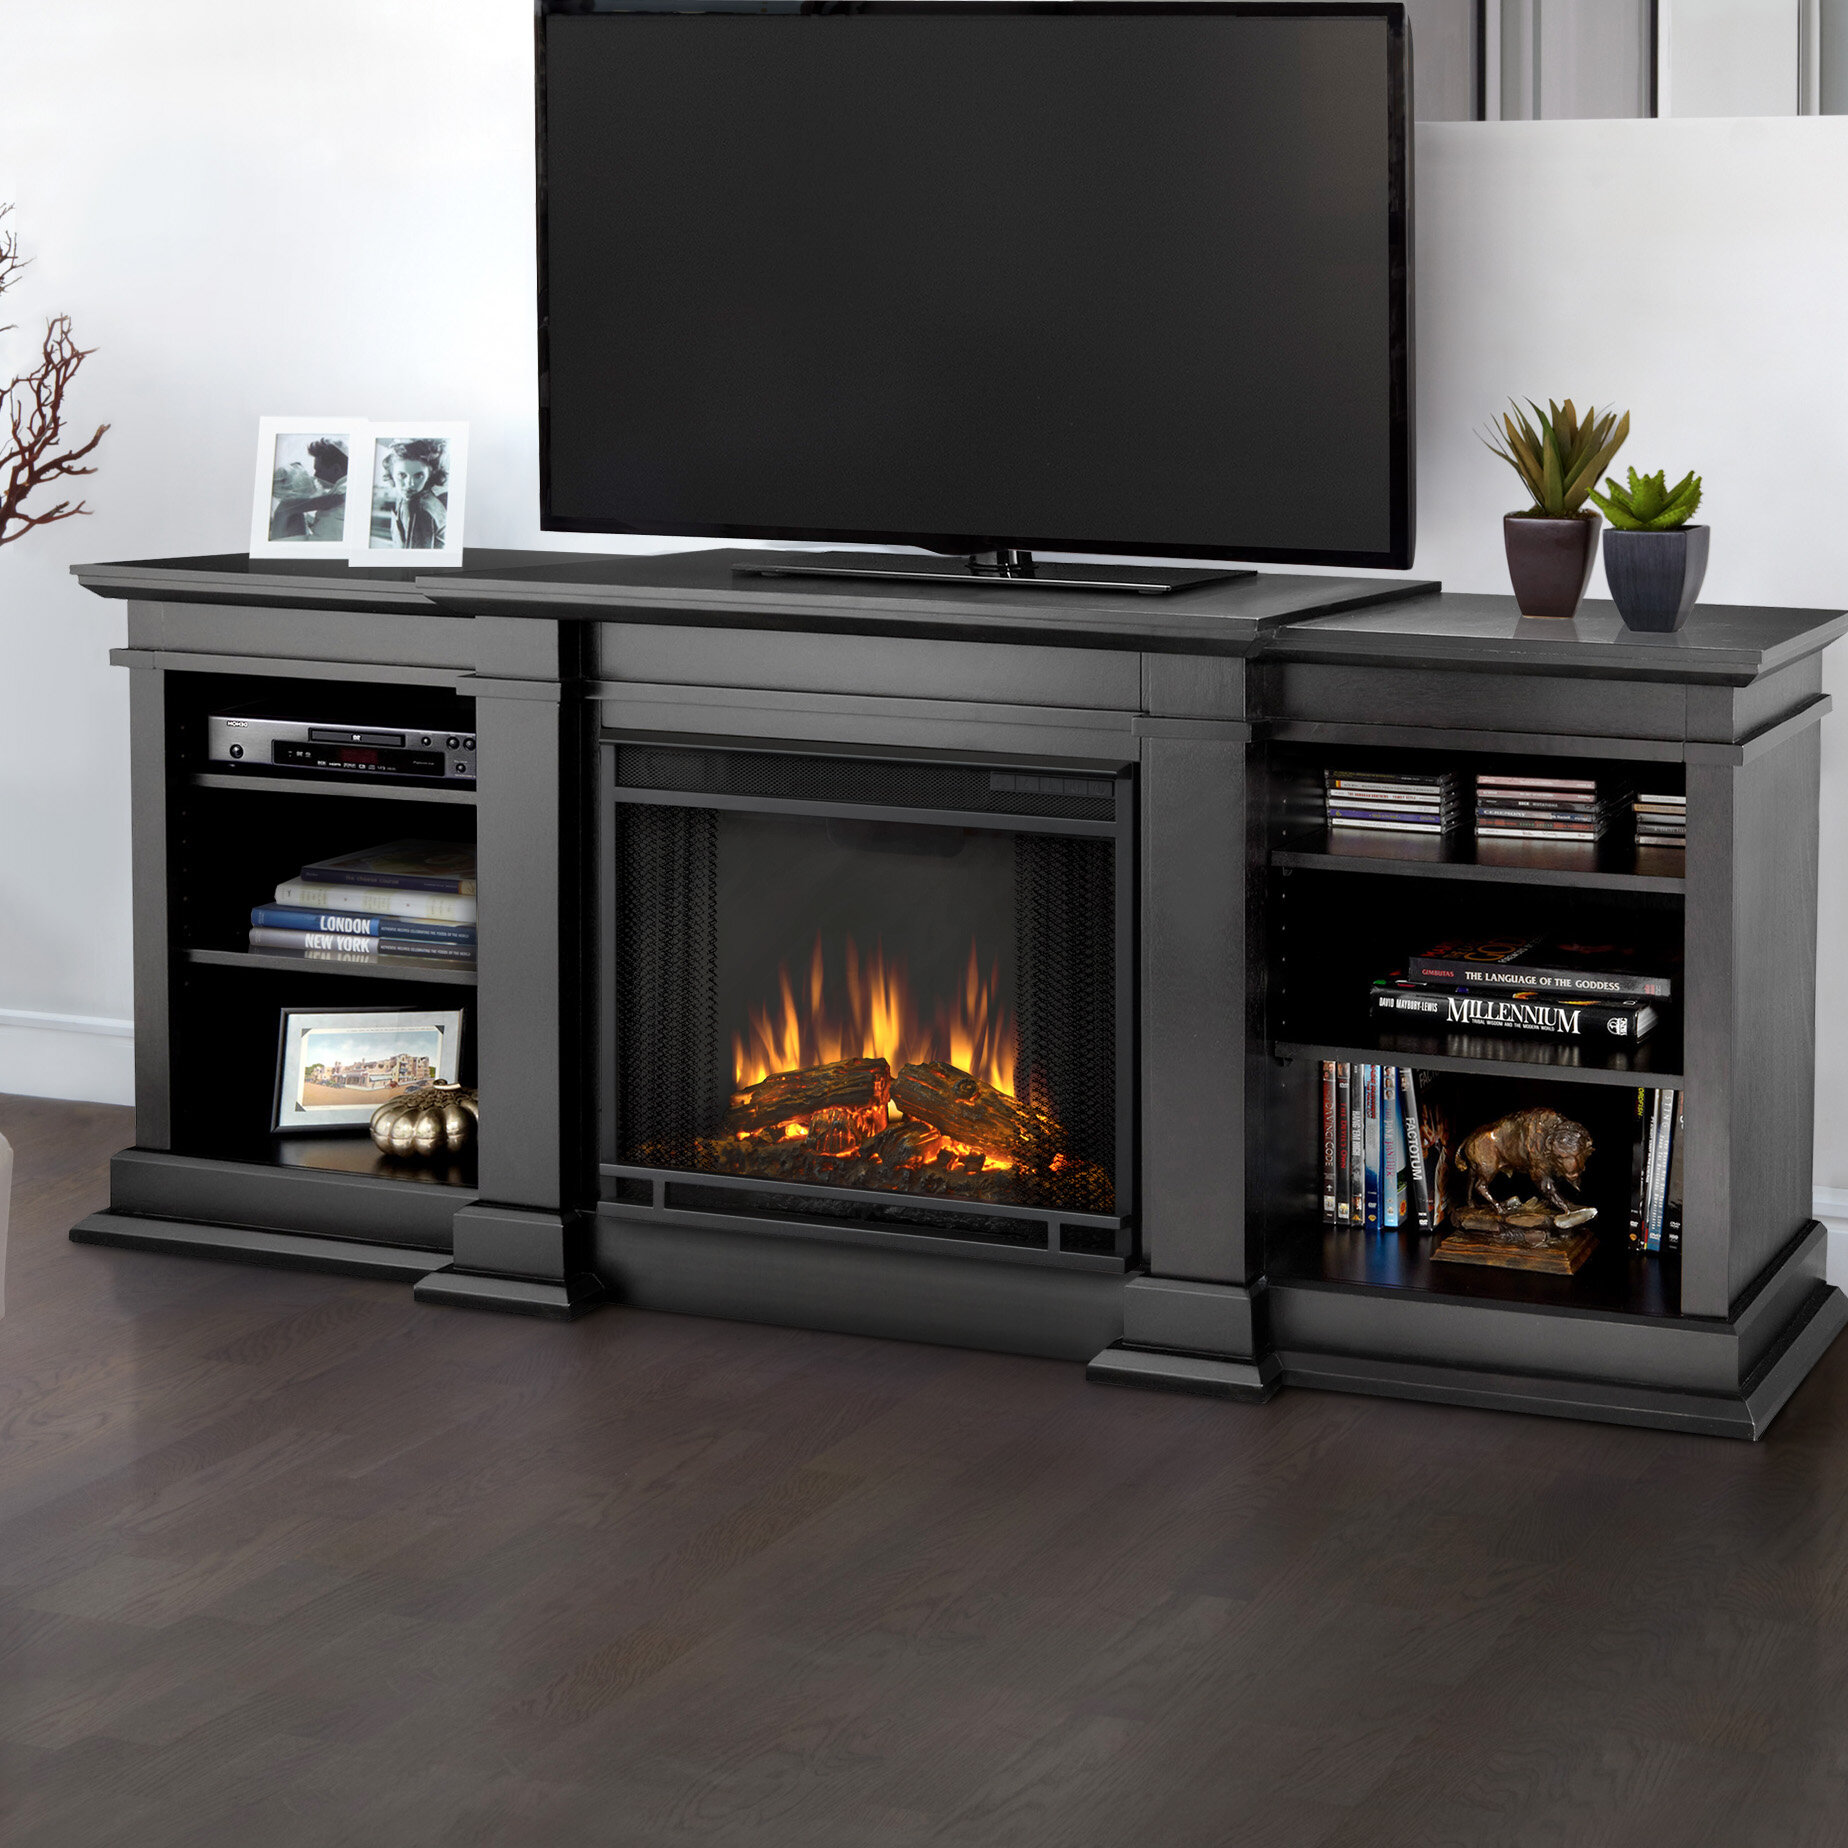 Cheap Electric Fireplace Tv Stand Beautiful 23 Fresh Electric Fireplace Wall Units Entertainment Center